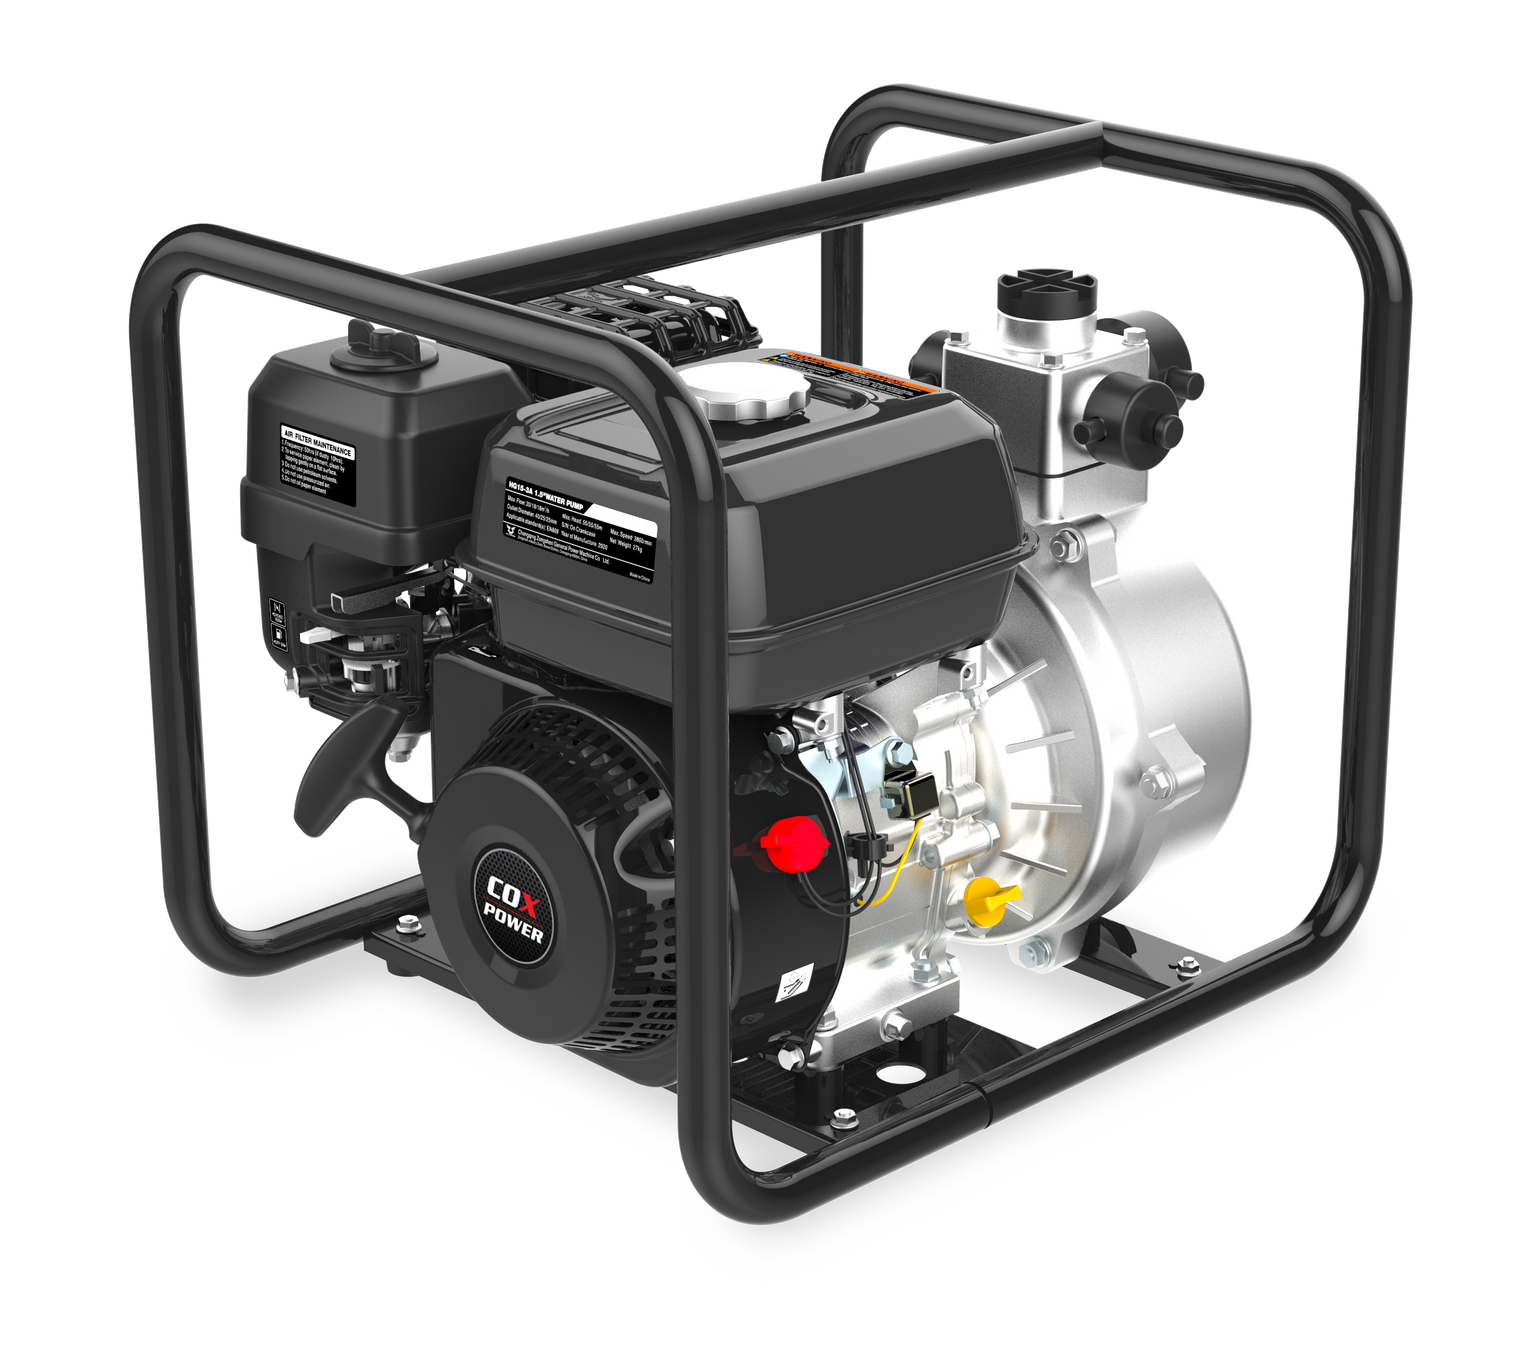 COX Power Water Pumps - Product image of a 2" transfer water pump 5hp